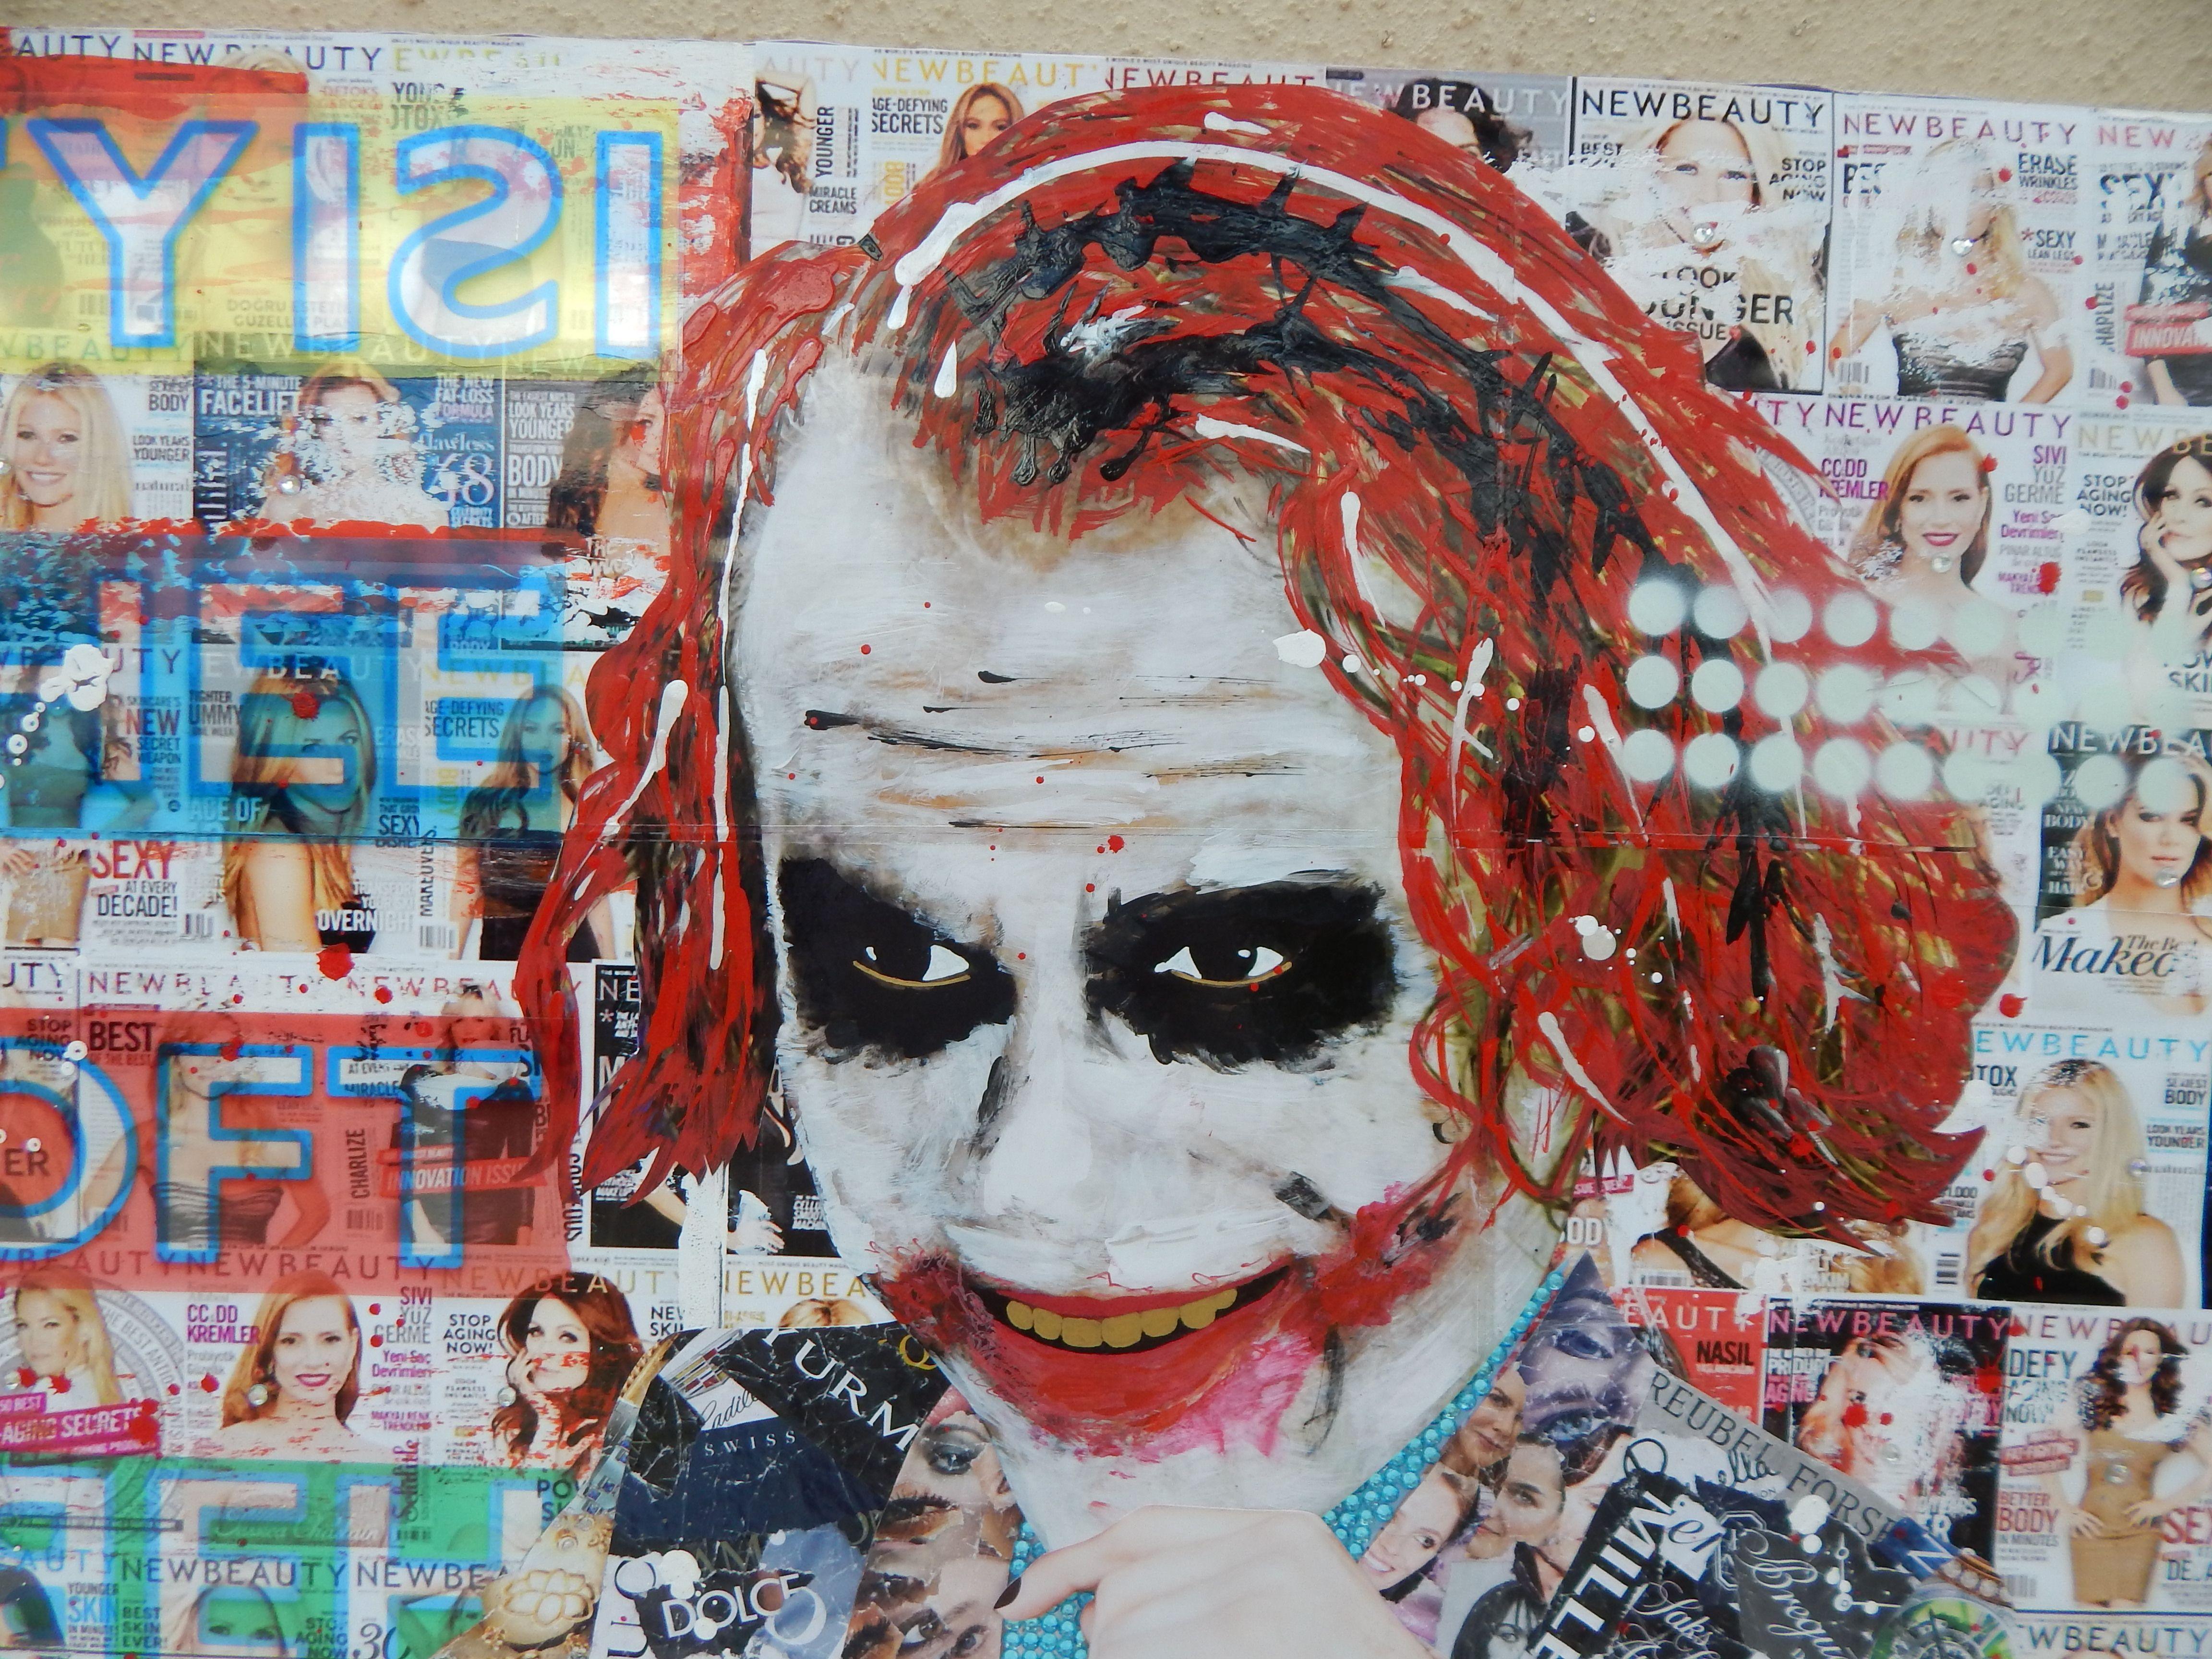 Using imagery from the movie, The Dark Knight, The Joker, played by Heath Ledger is used to show the contrast from what others may deem not beautiful versus the individual's personal view leaving the decision to the individual. Objective of the